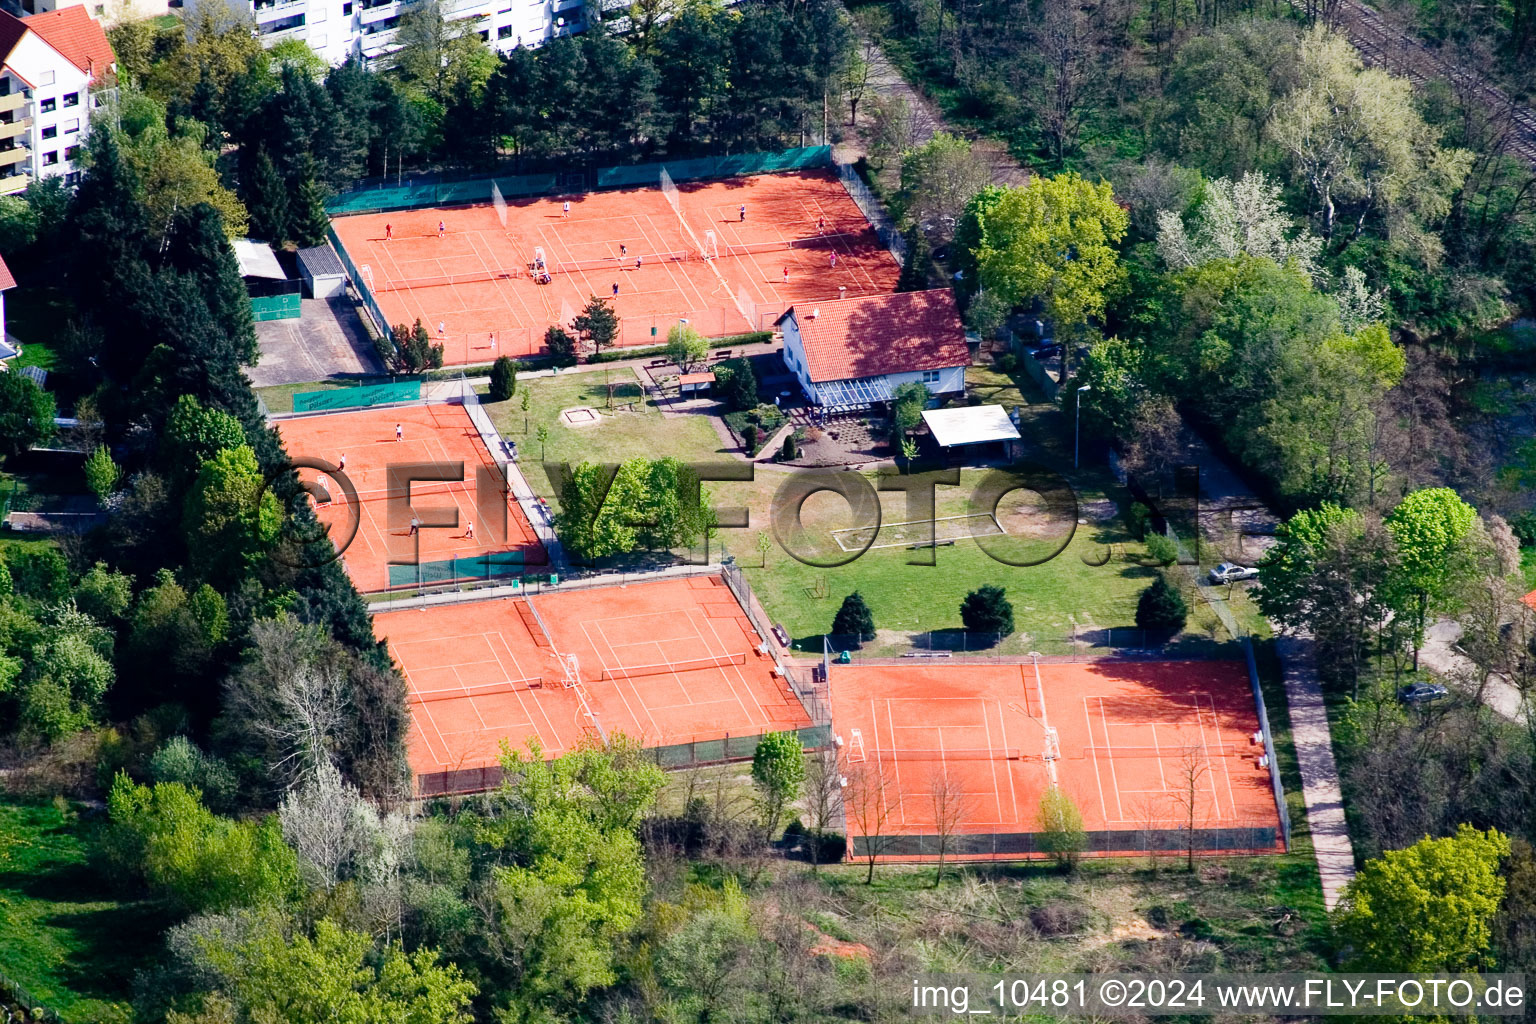 Aerial photograpy of Tennis club in Jockgrim in the state Rhineland-Palatinate, Germany